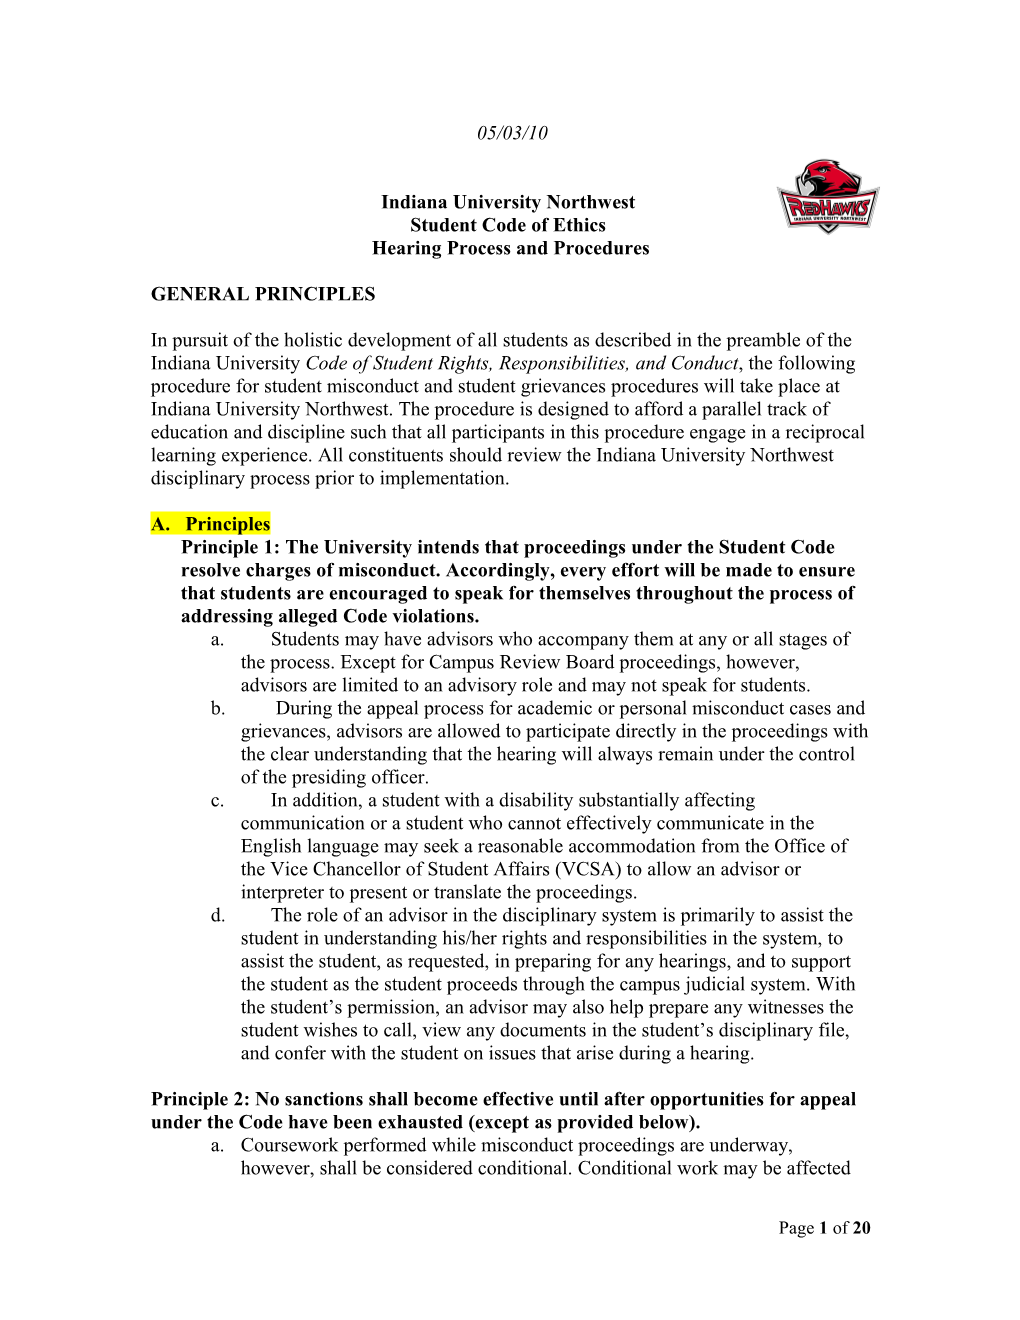 Indiana University Northwest Campus Policy for Violating the Code of Ethics